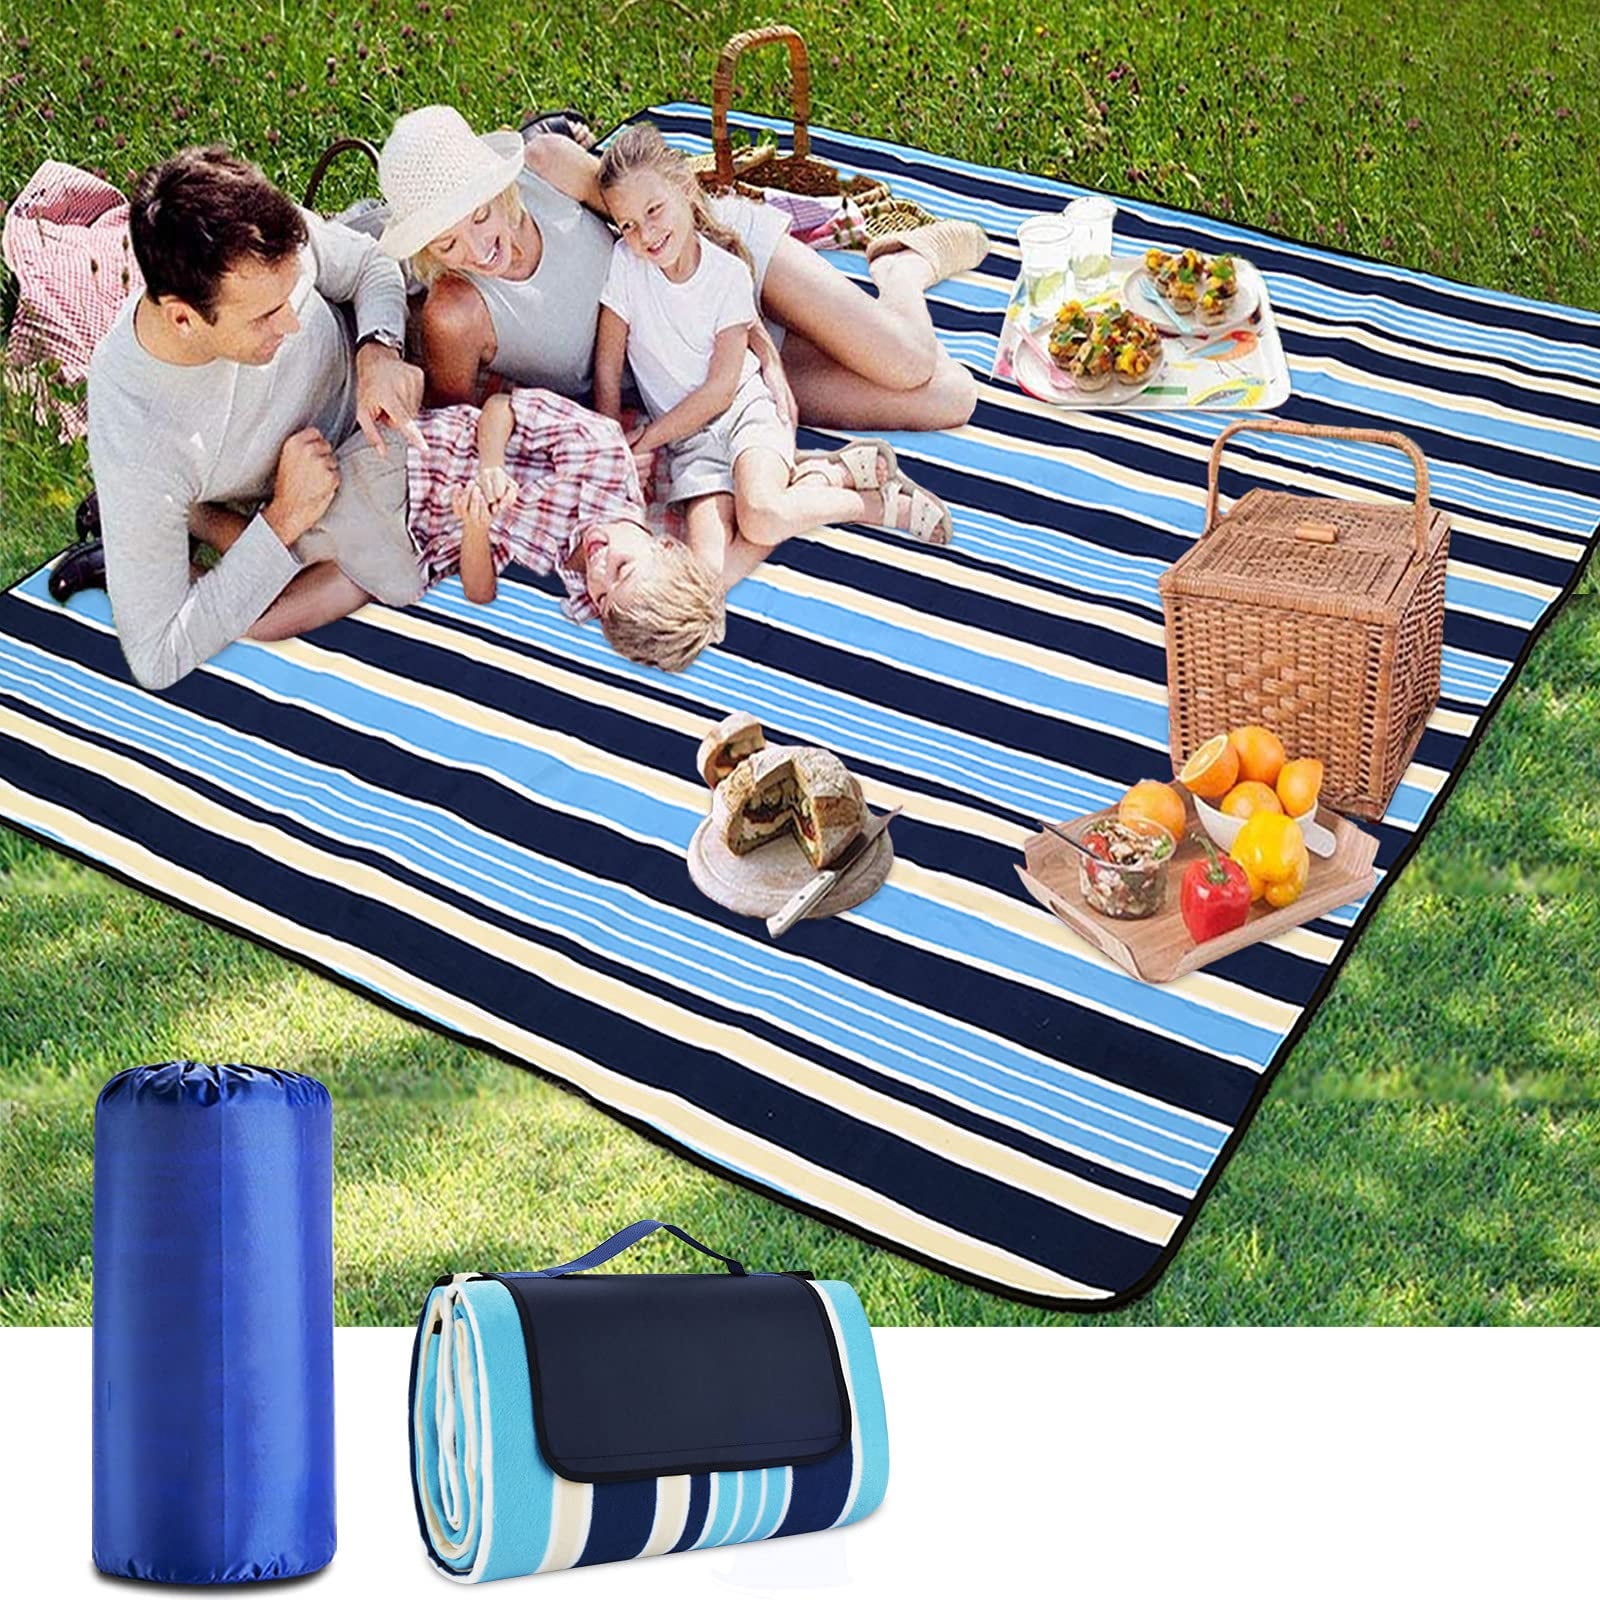 Lightweight Foldable Camping Mat for Outdoor Concert Camping Hiking Grass Travel Waterproof Beach Blanket Sand Proof Oversized Comfortable Picnic Mat with Handle Extra Large Picnic Blanket